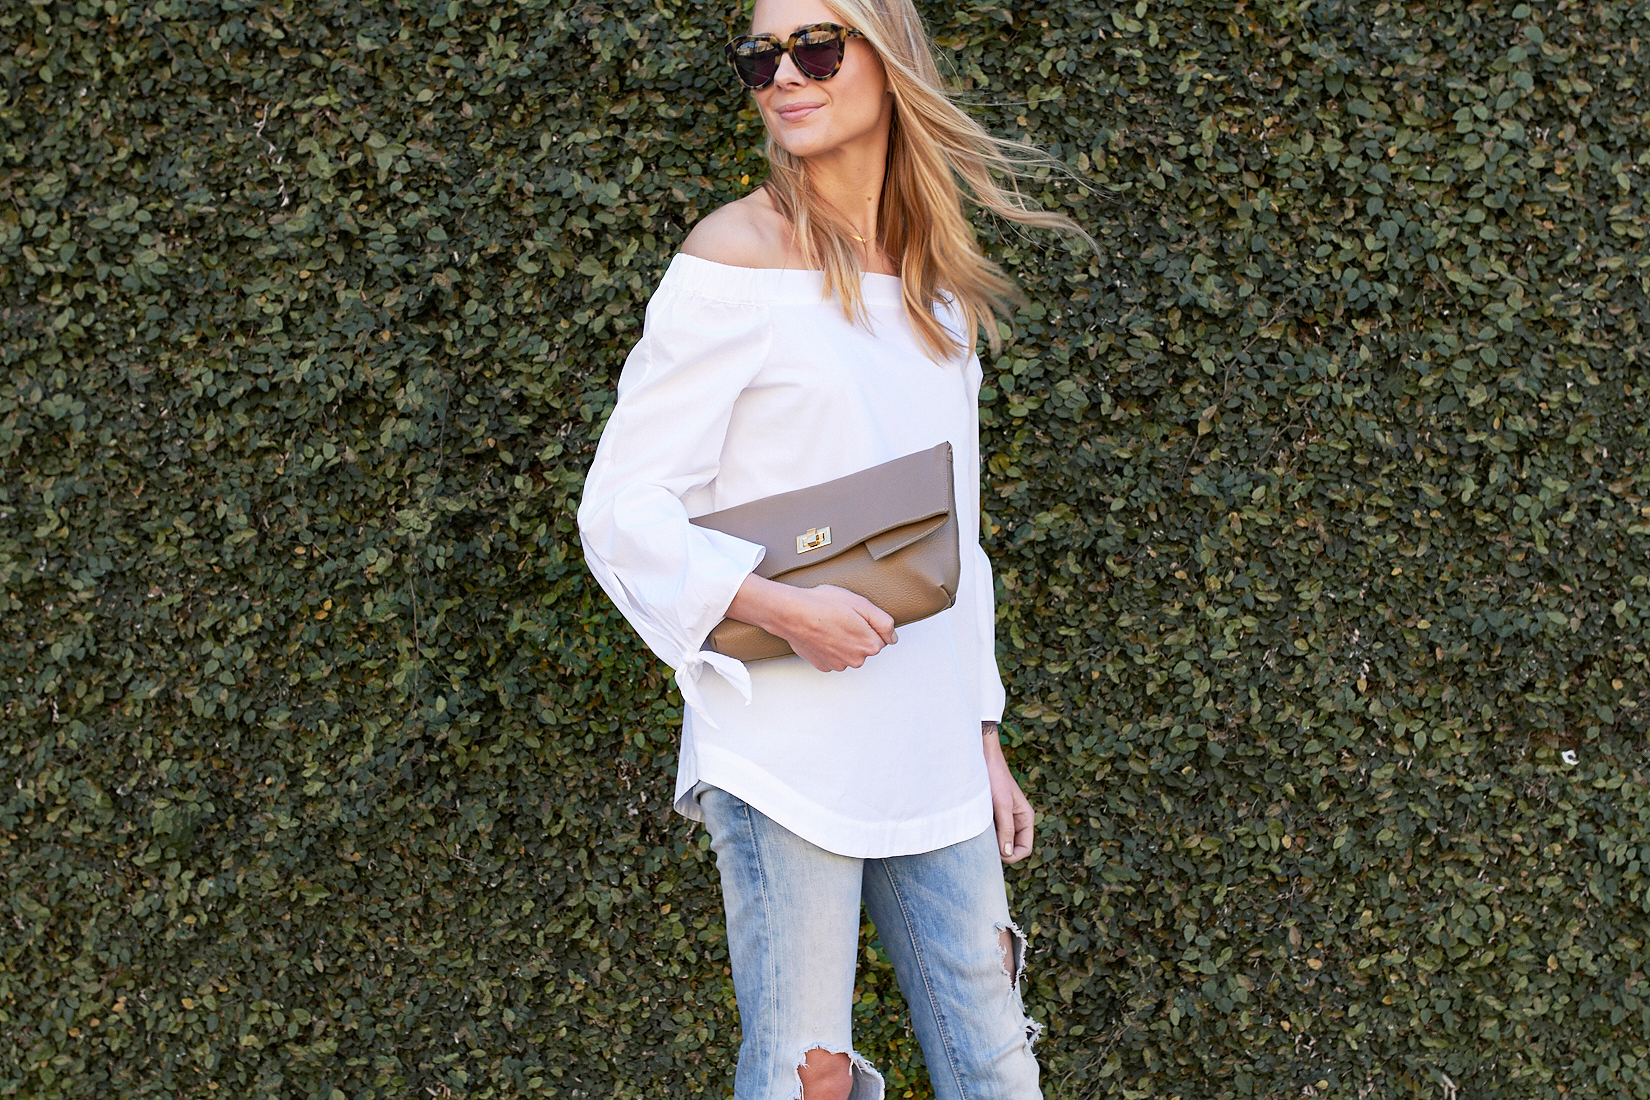 fashion-jackson-gigi-new-york-claire-clutch-taupe-free-people-white-off-the-shoulder-top-denim-ripped-jeans-tortoise-sunglasses